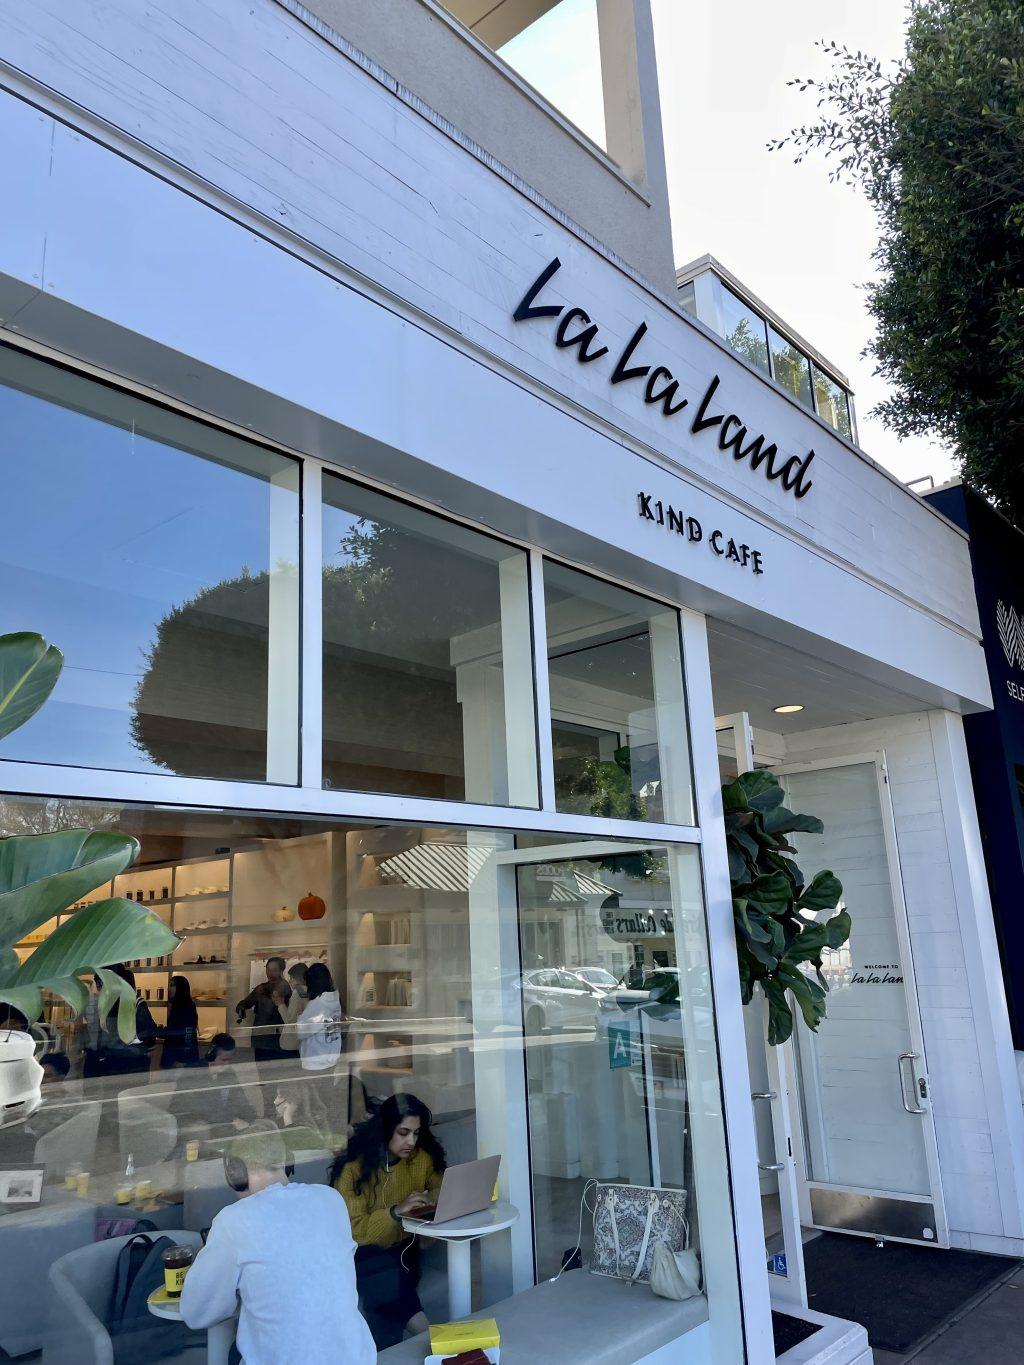 La La Land Kind Cafe's open windows and natural light beckons customers into the bright and airy coffee shop April 8. Customers were able to choose between luxurious indoor couches or shaded patio seating after ordering their favorite drink.